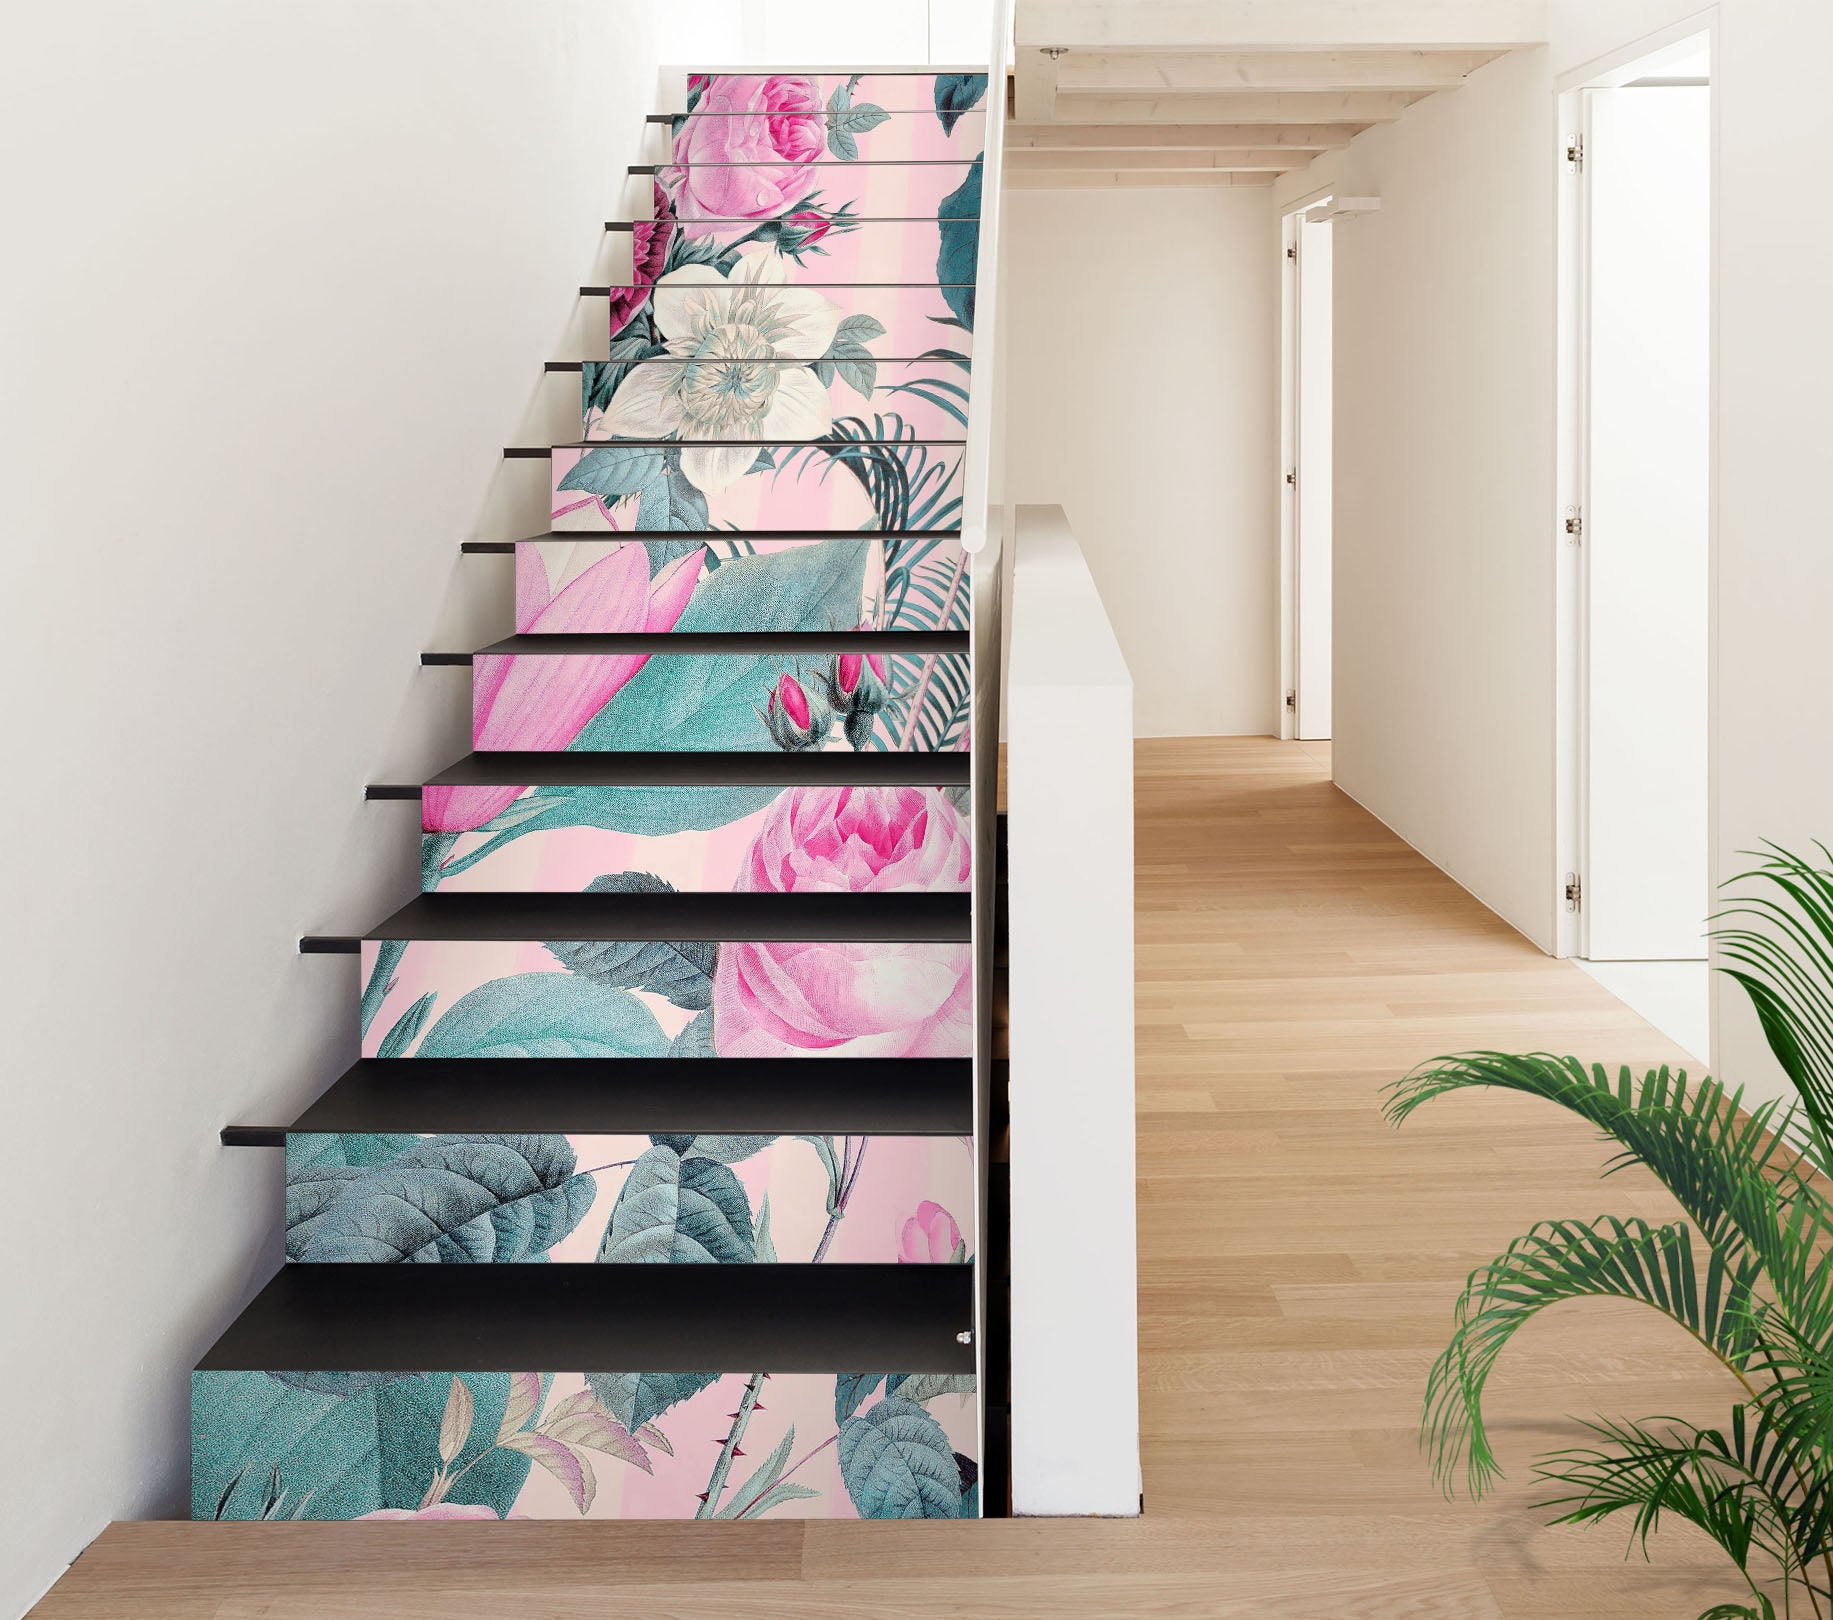 3D Rose Flower 109204 Andrea Haase Stair Risers